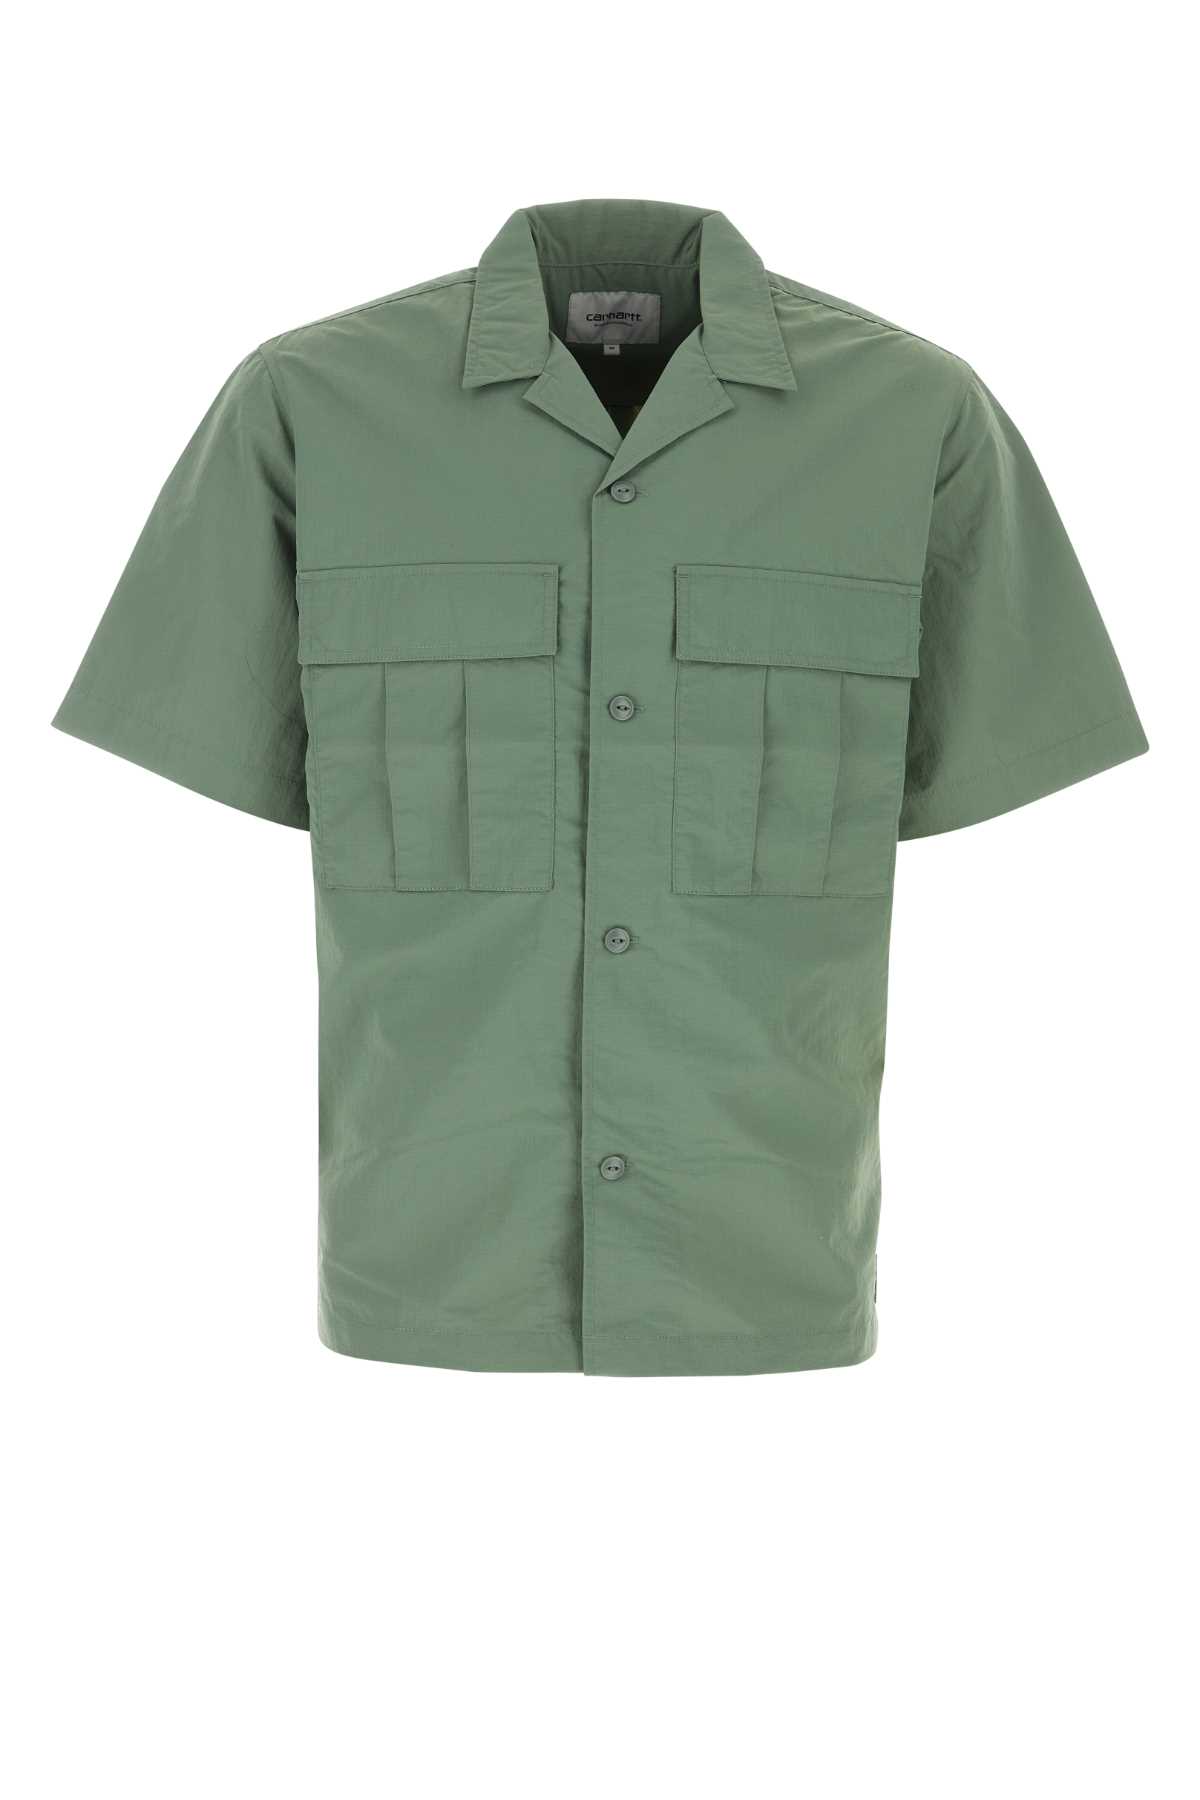 Shop Carhartt Army Green Nylon S/s Evers Shirt In Wall